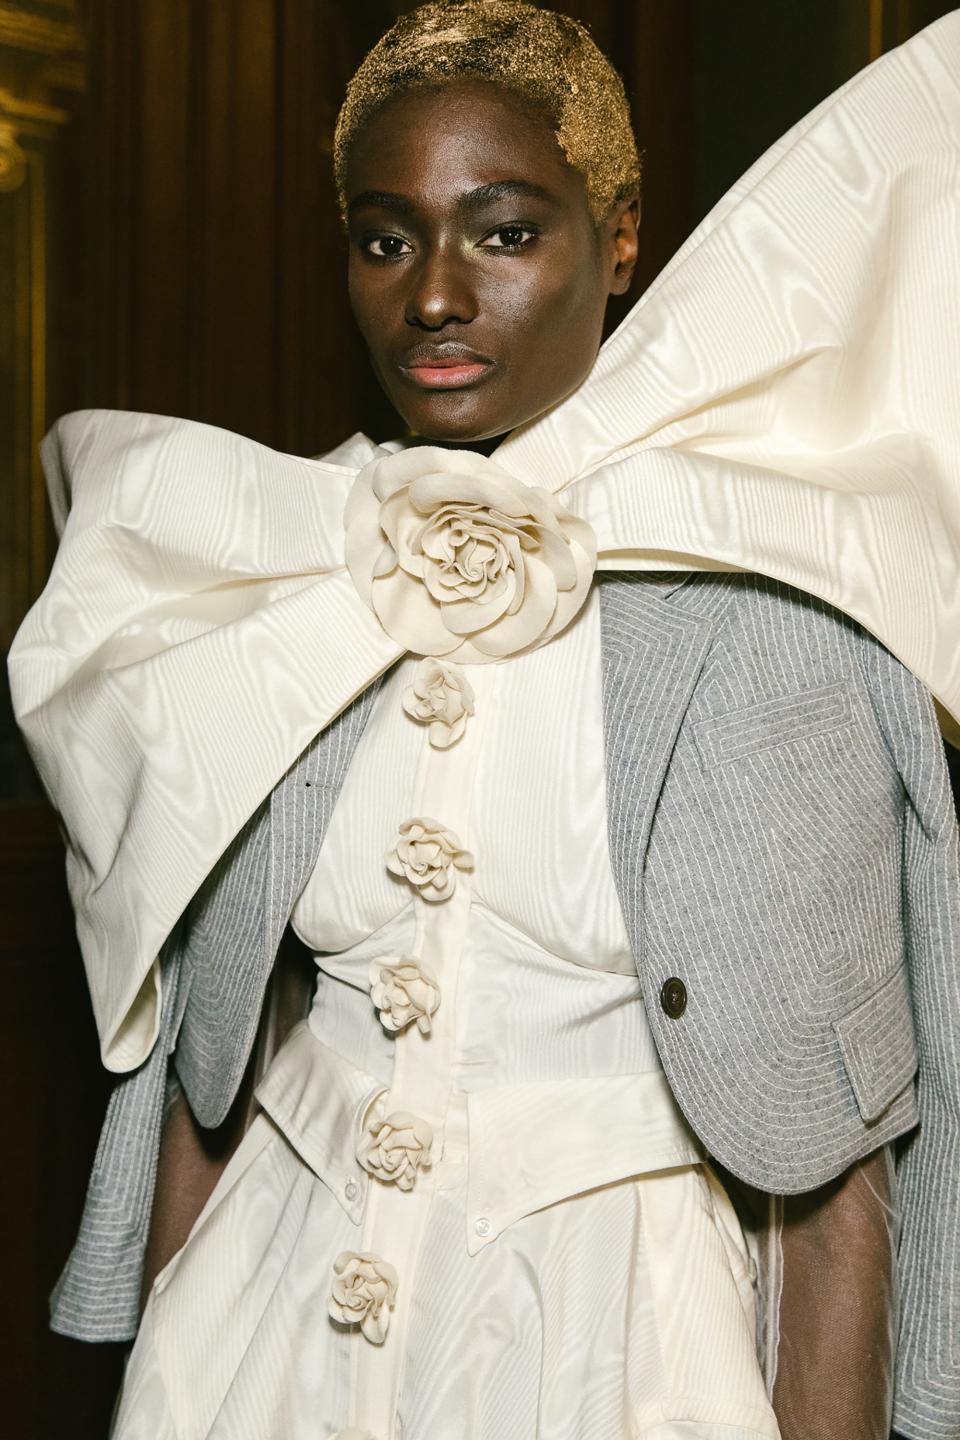 Thom Browne’s Fall 2018 fashion show sends shock waves through Paris with Marie Antoinette–inspired beauty on the runway.